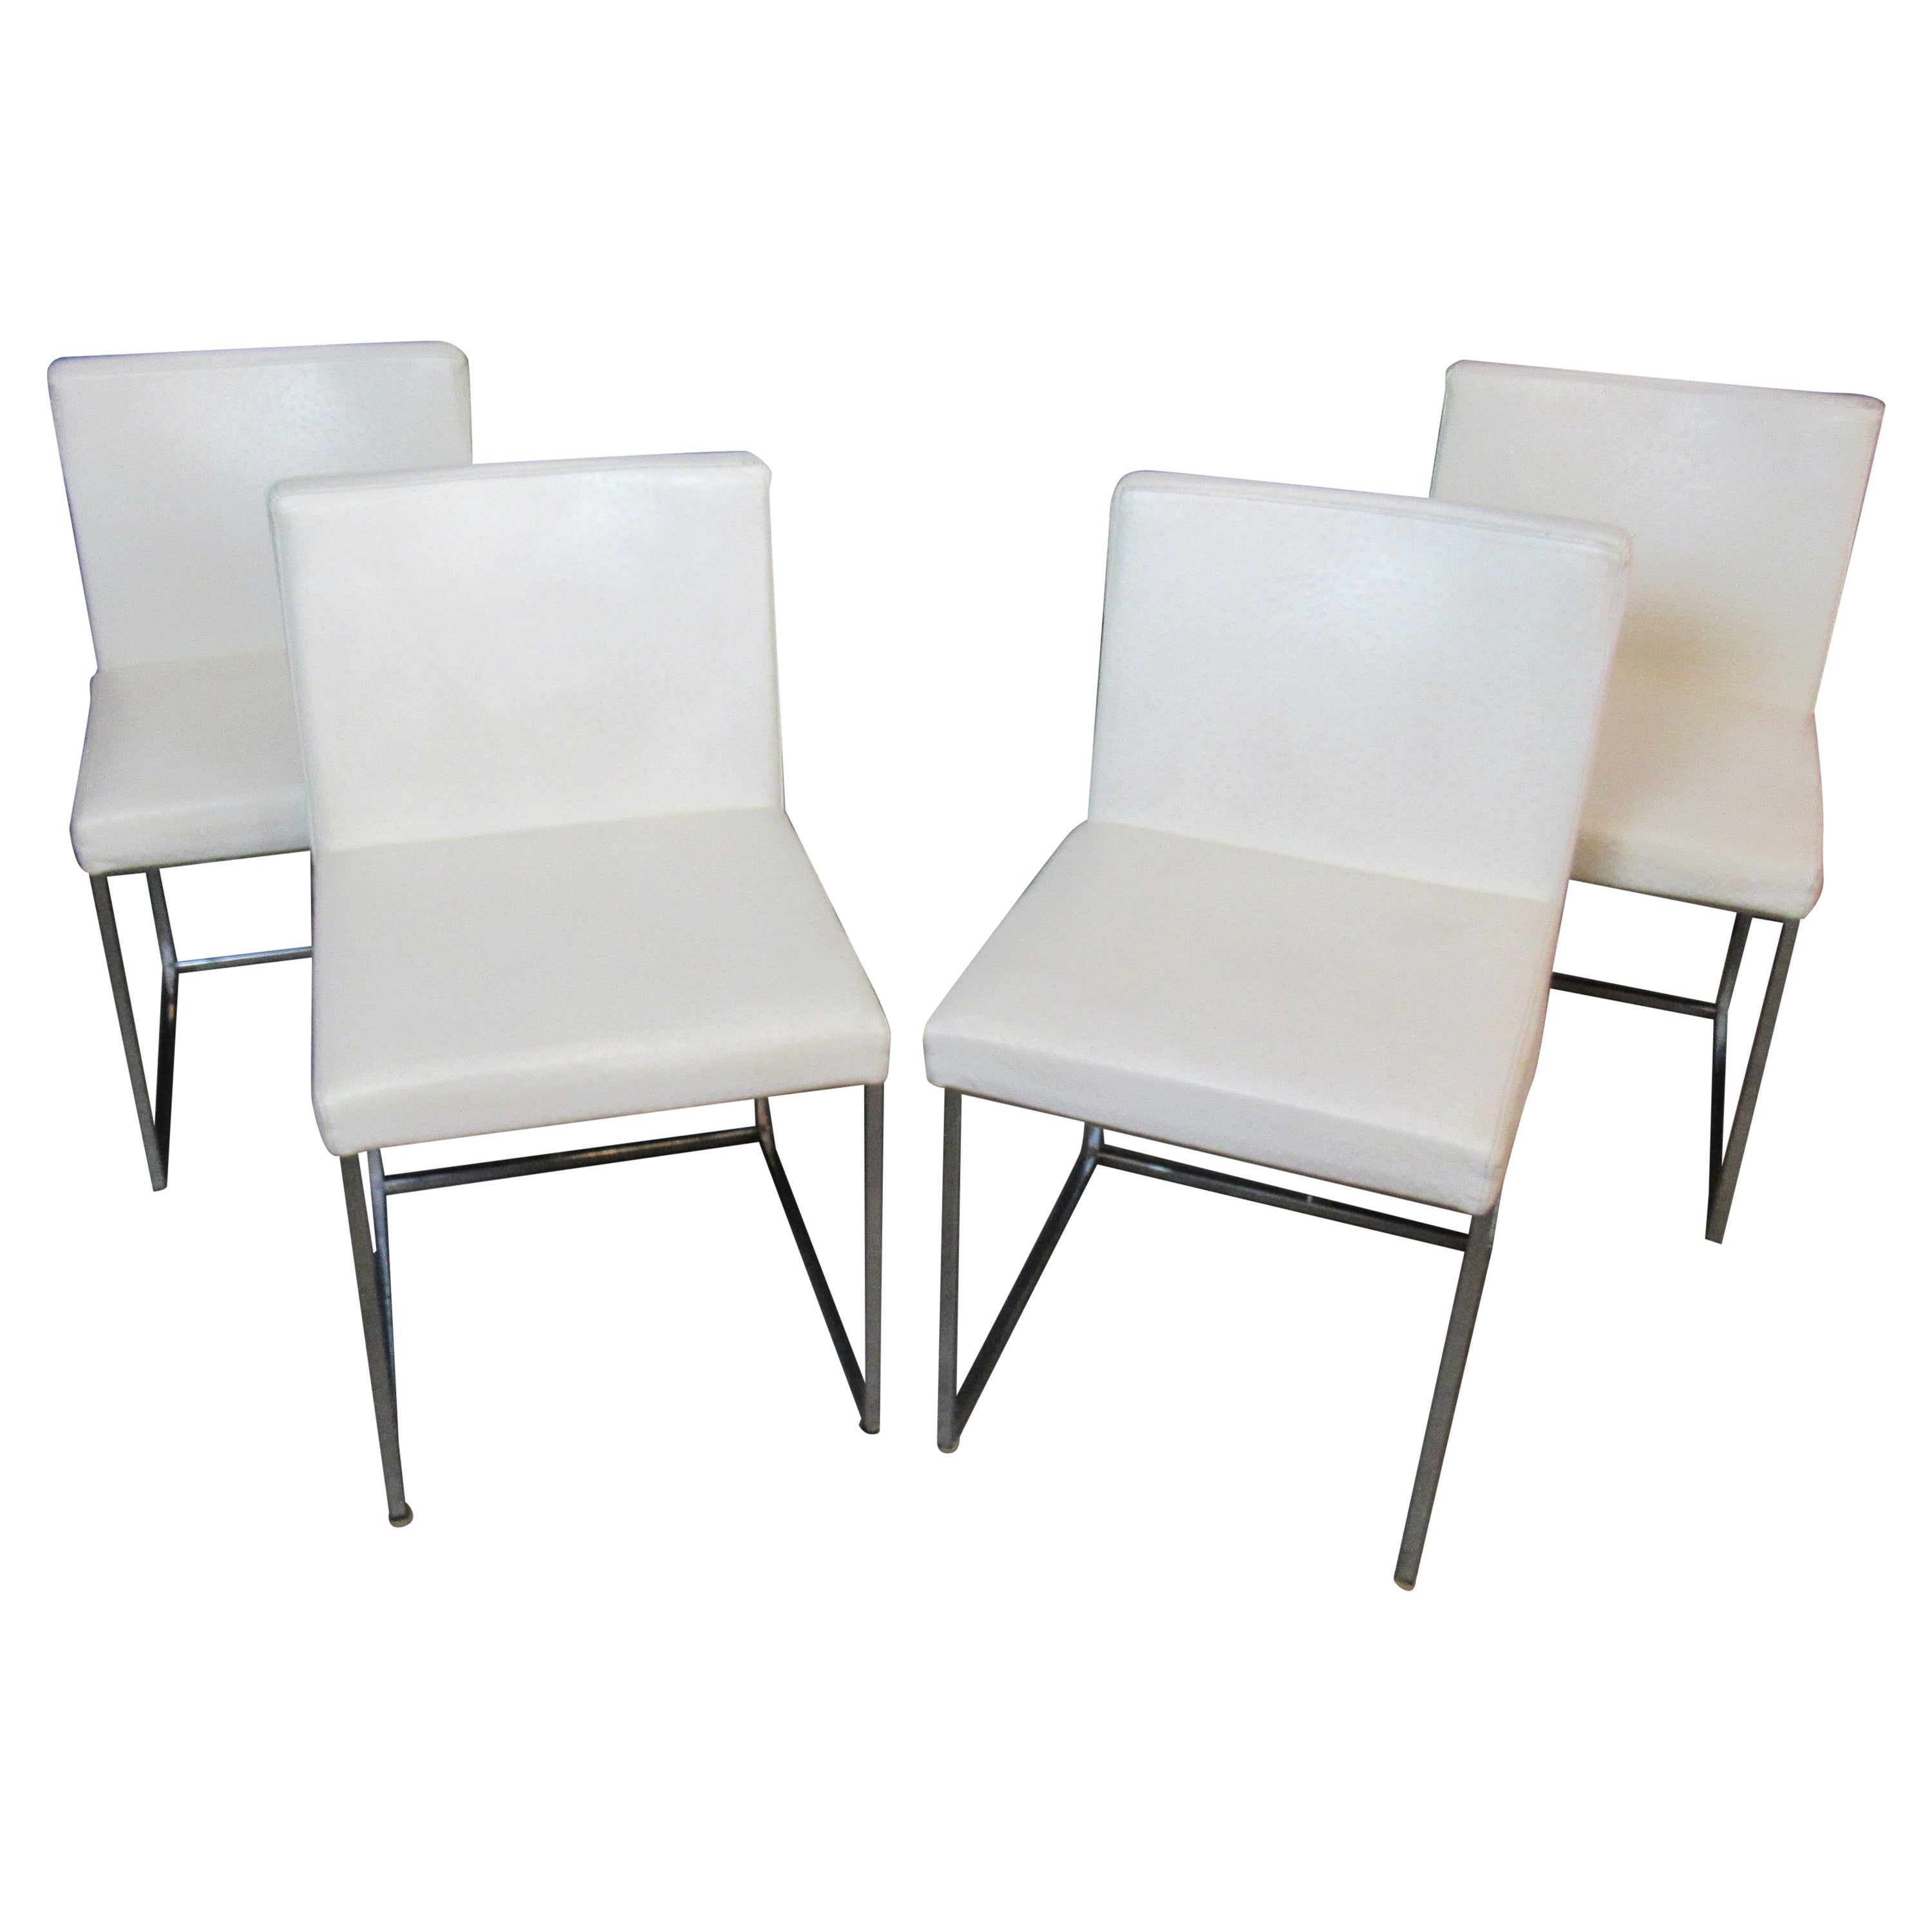 Ostrich Leather Dining Room Chairs